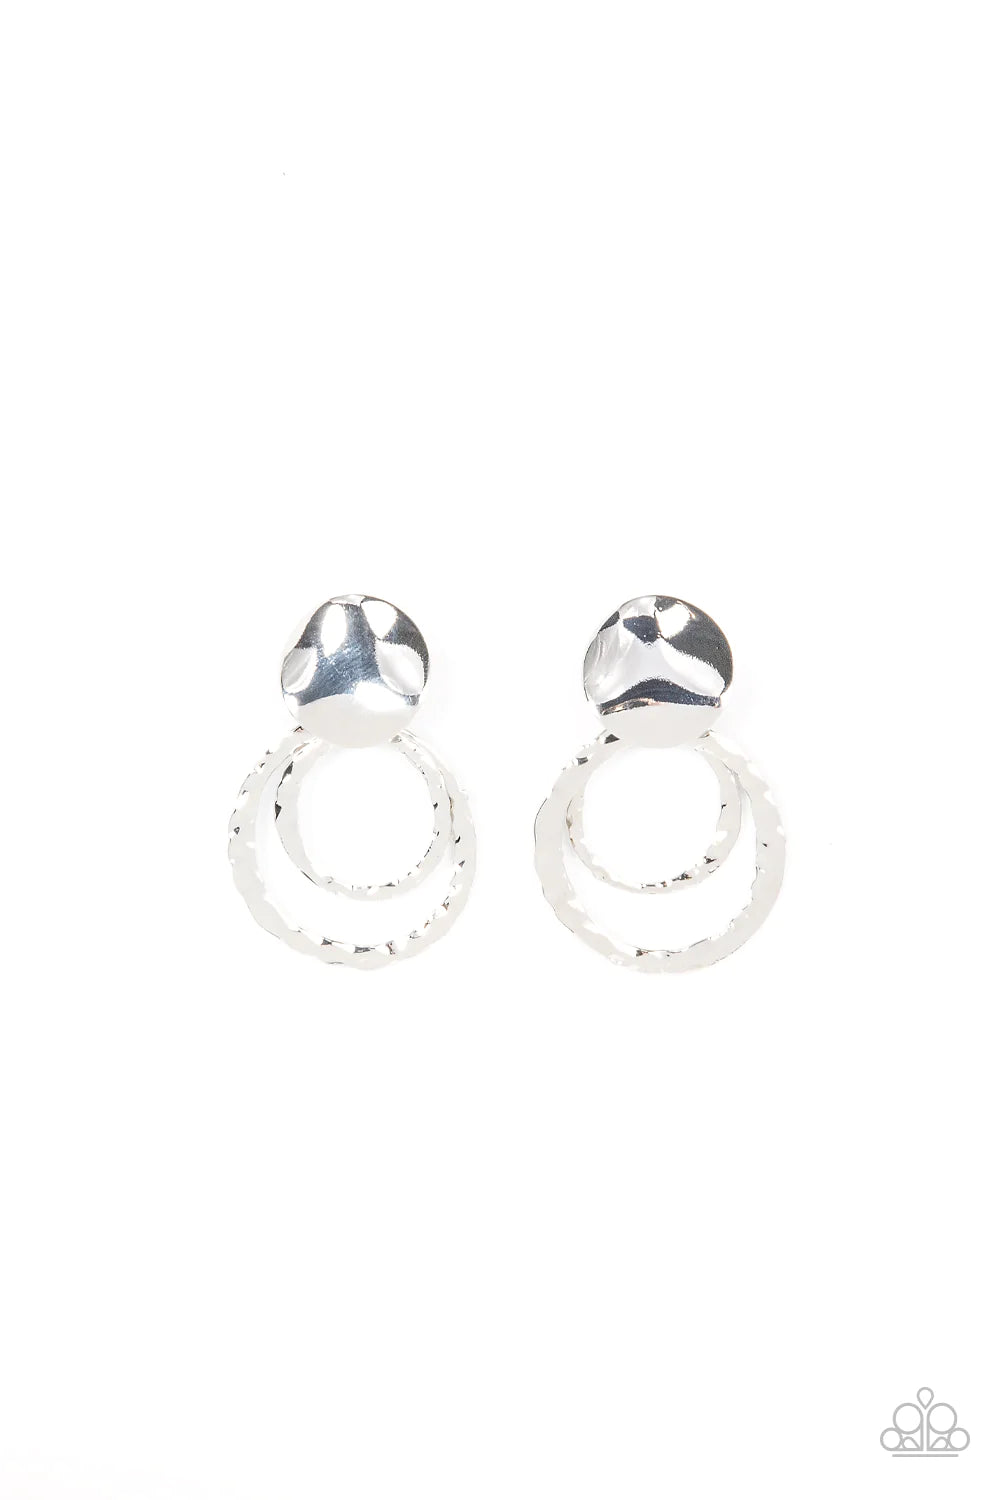 Paparazzi Accessories Ancient Arts - Silver Two shiny hammered silver circles swing from a wavy silver disc, creating a captivating lure. Earring attaches to a standard post fitting. Sold as one pair of post earrings. Jewelry